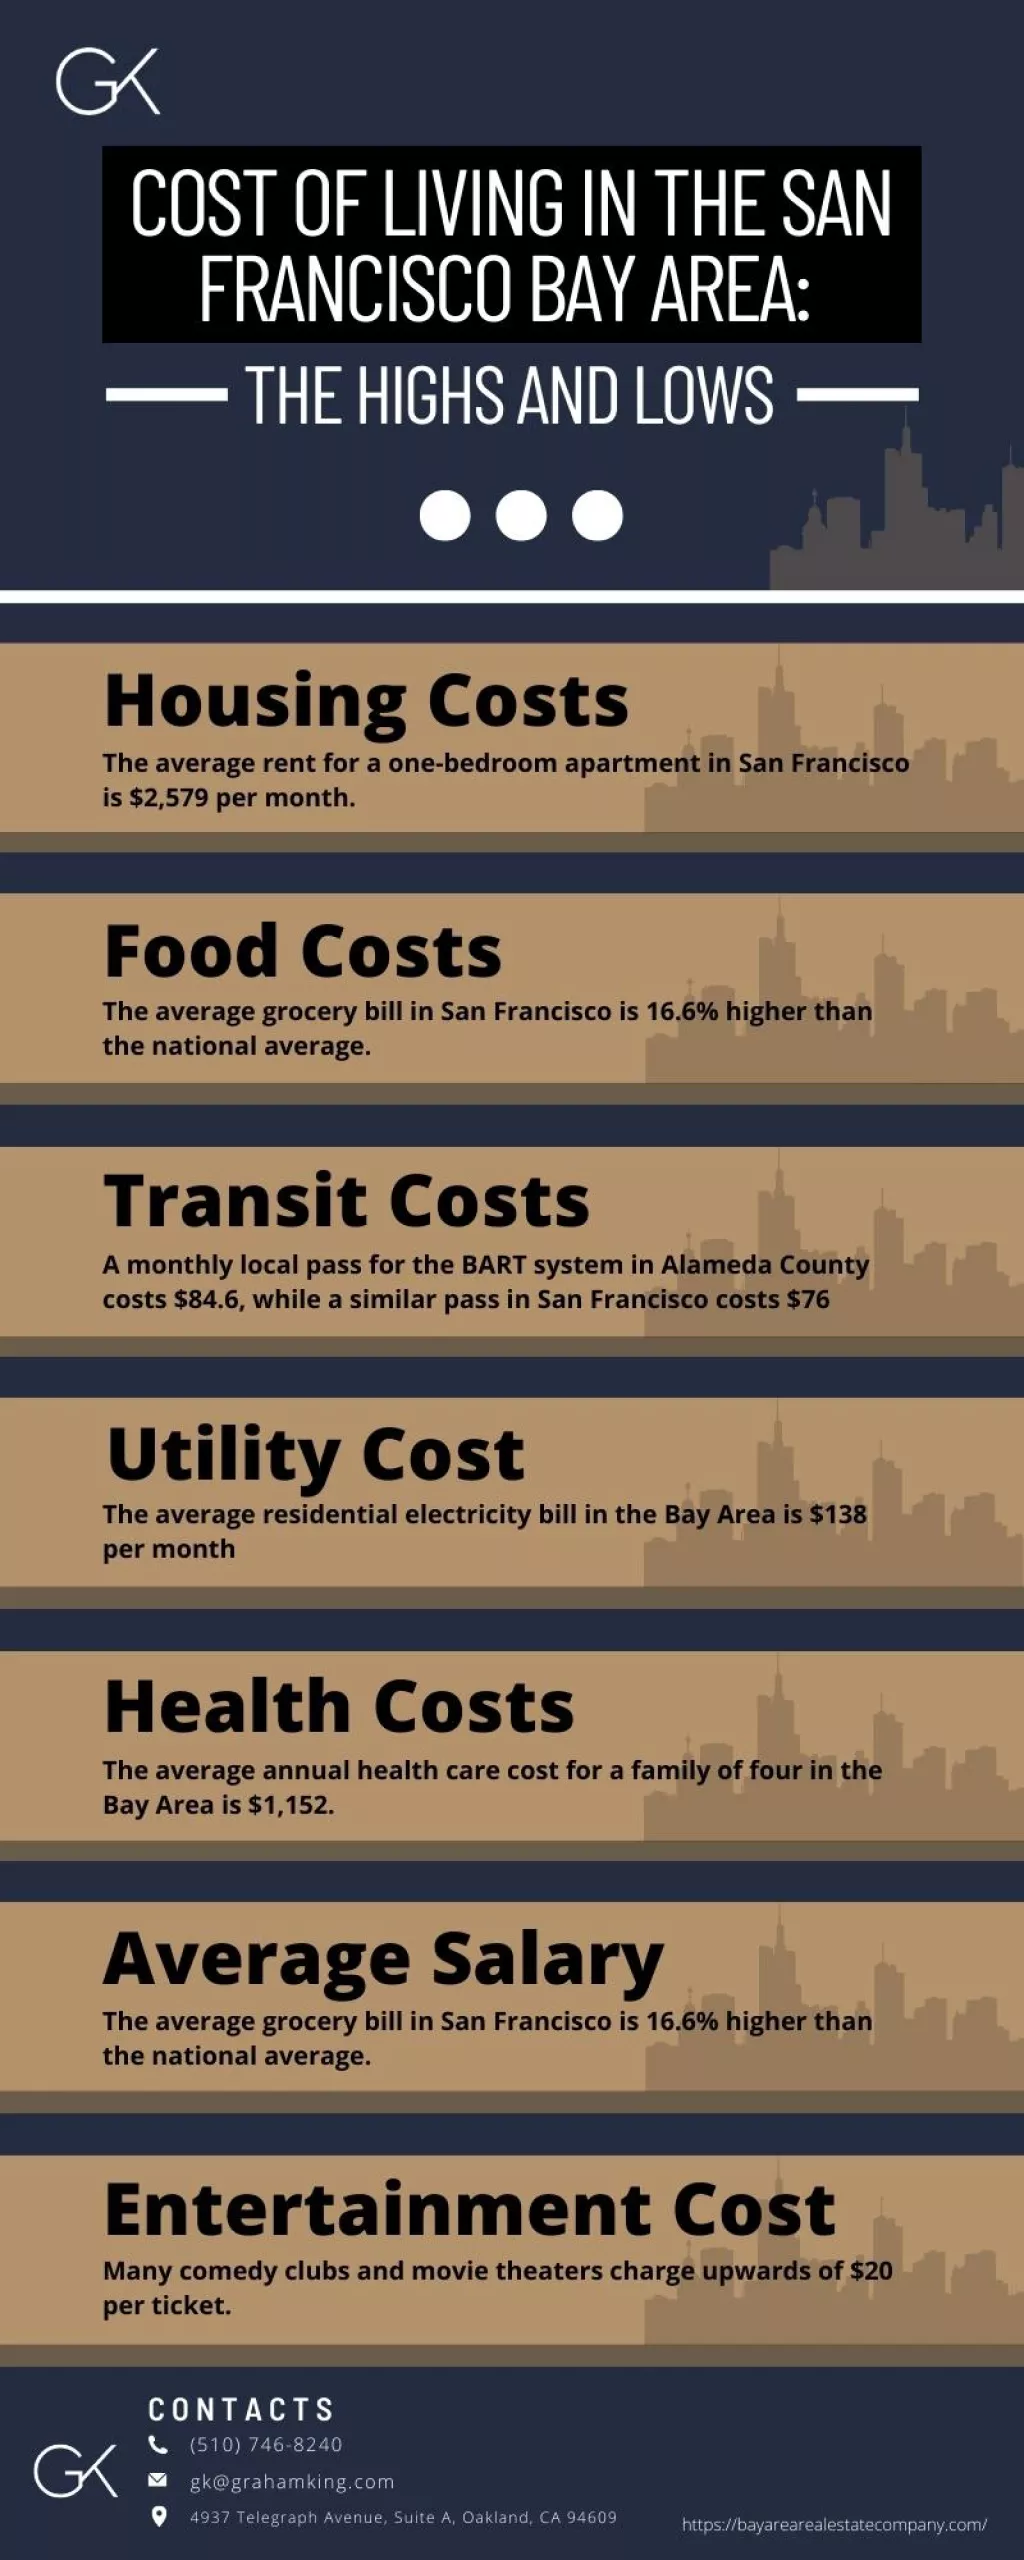 Cost of Living in the San Francisco Bay Area The Highs And Lows